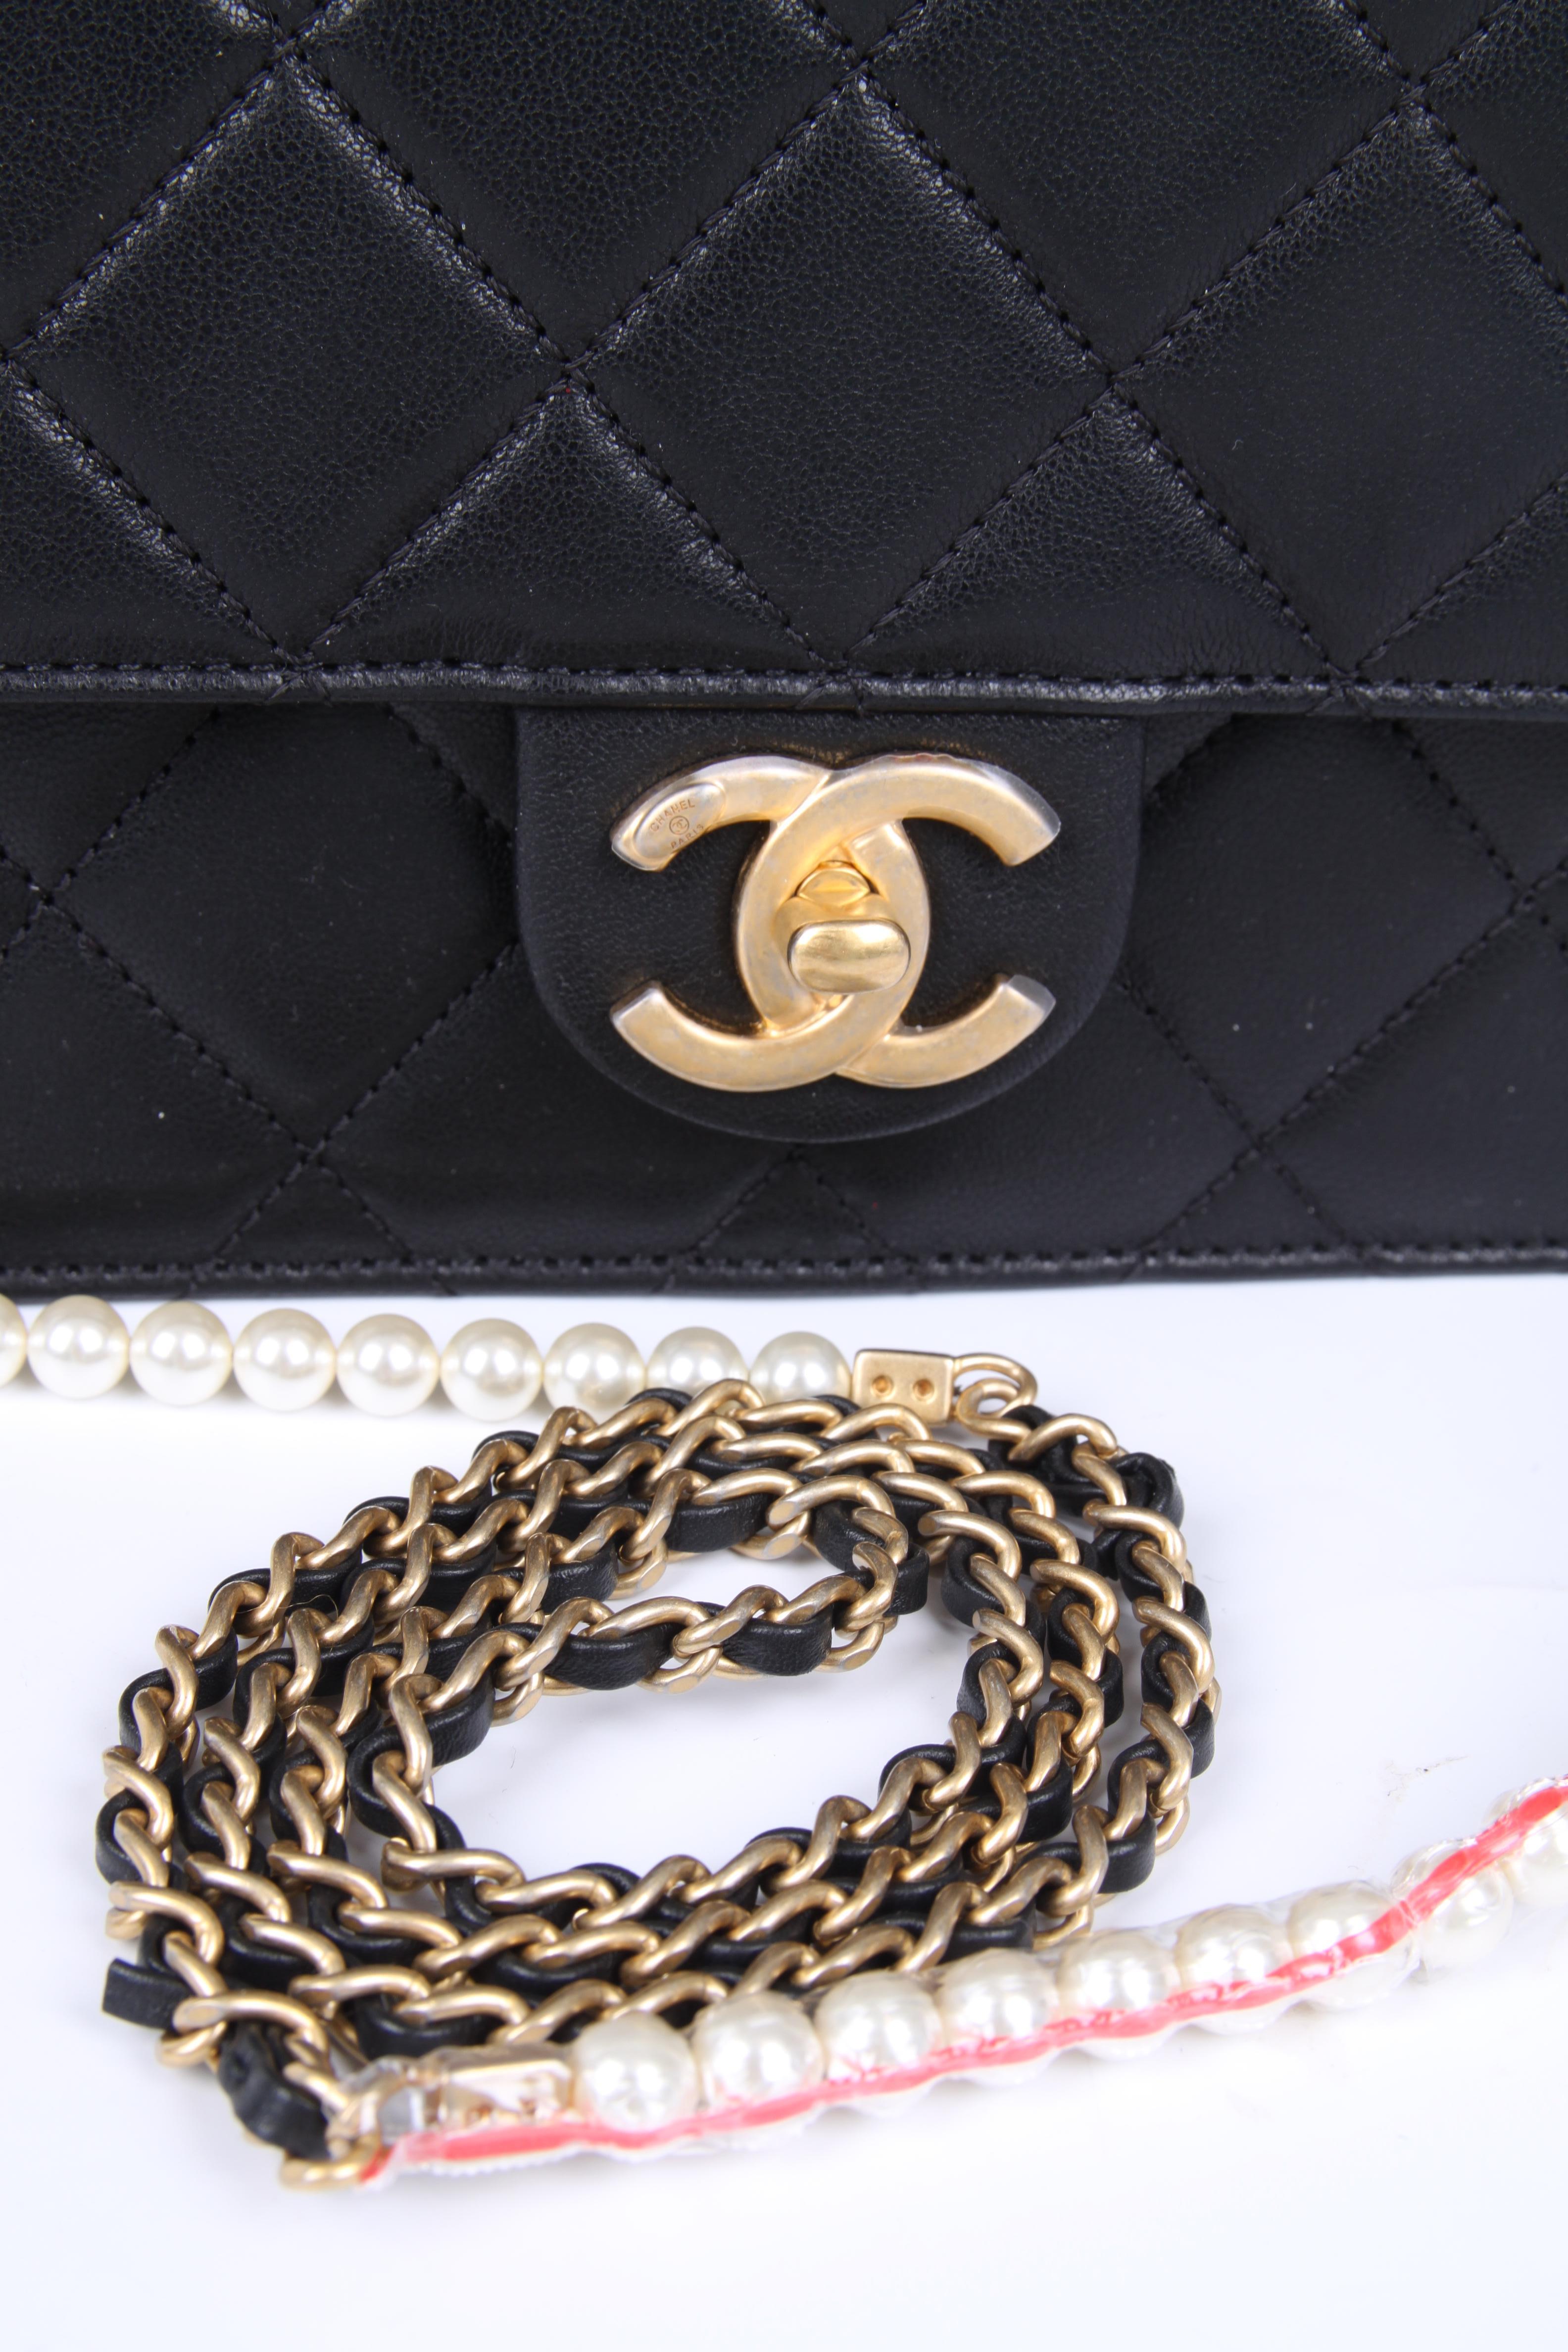 Black New! Chanel Quilted Flap Bag 2019 - black